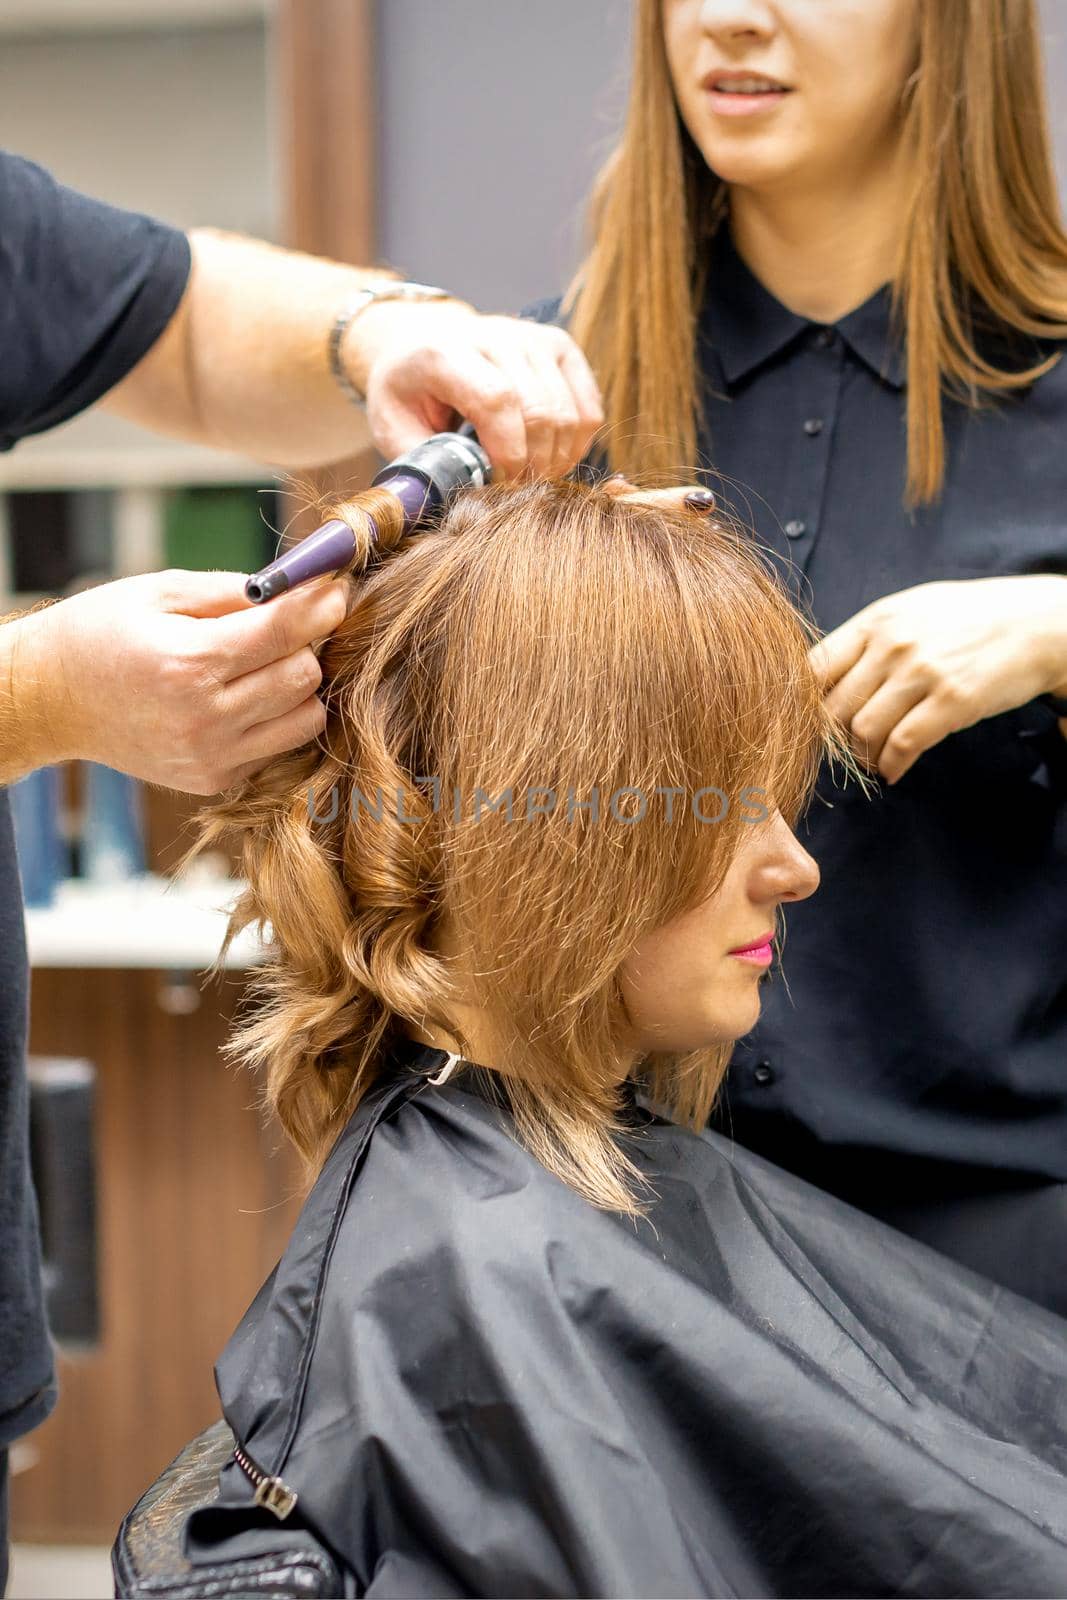 Two hairstylists make curls hairstyle of long brown hair with the curling iron in hairdresser salon. by okskukuruza